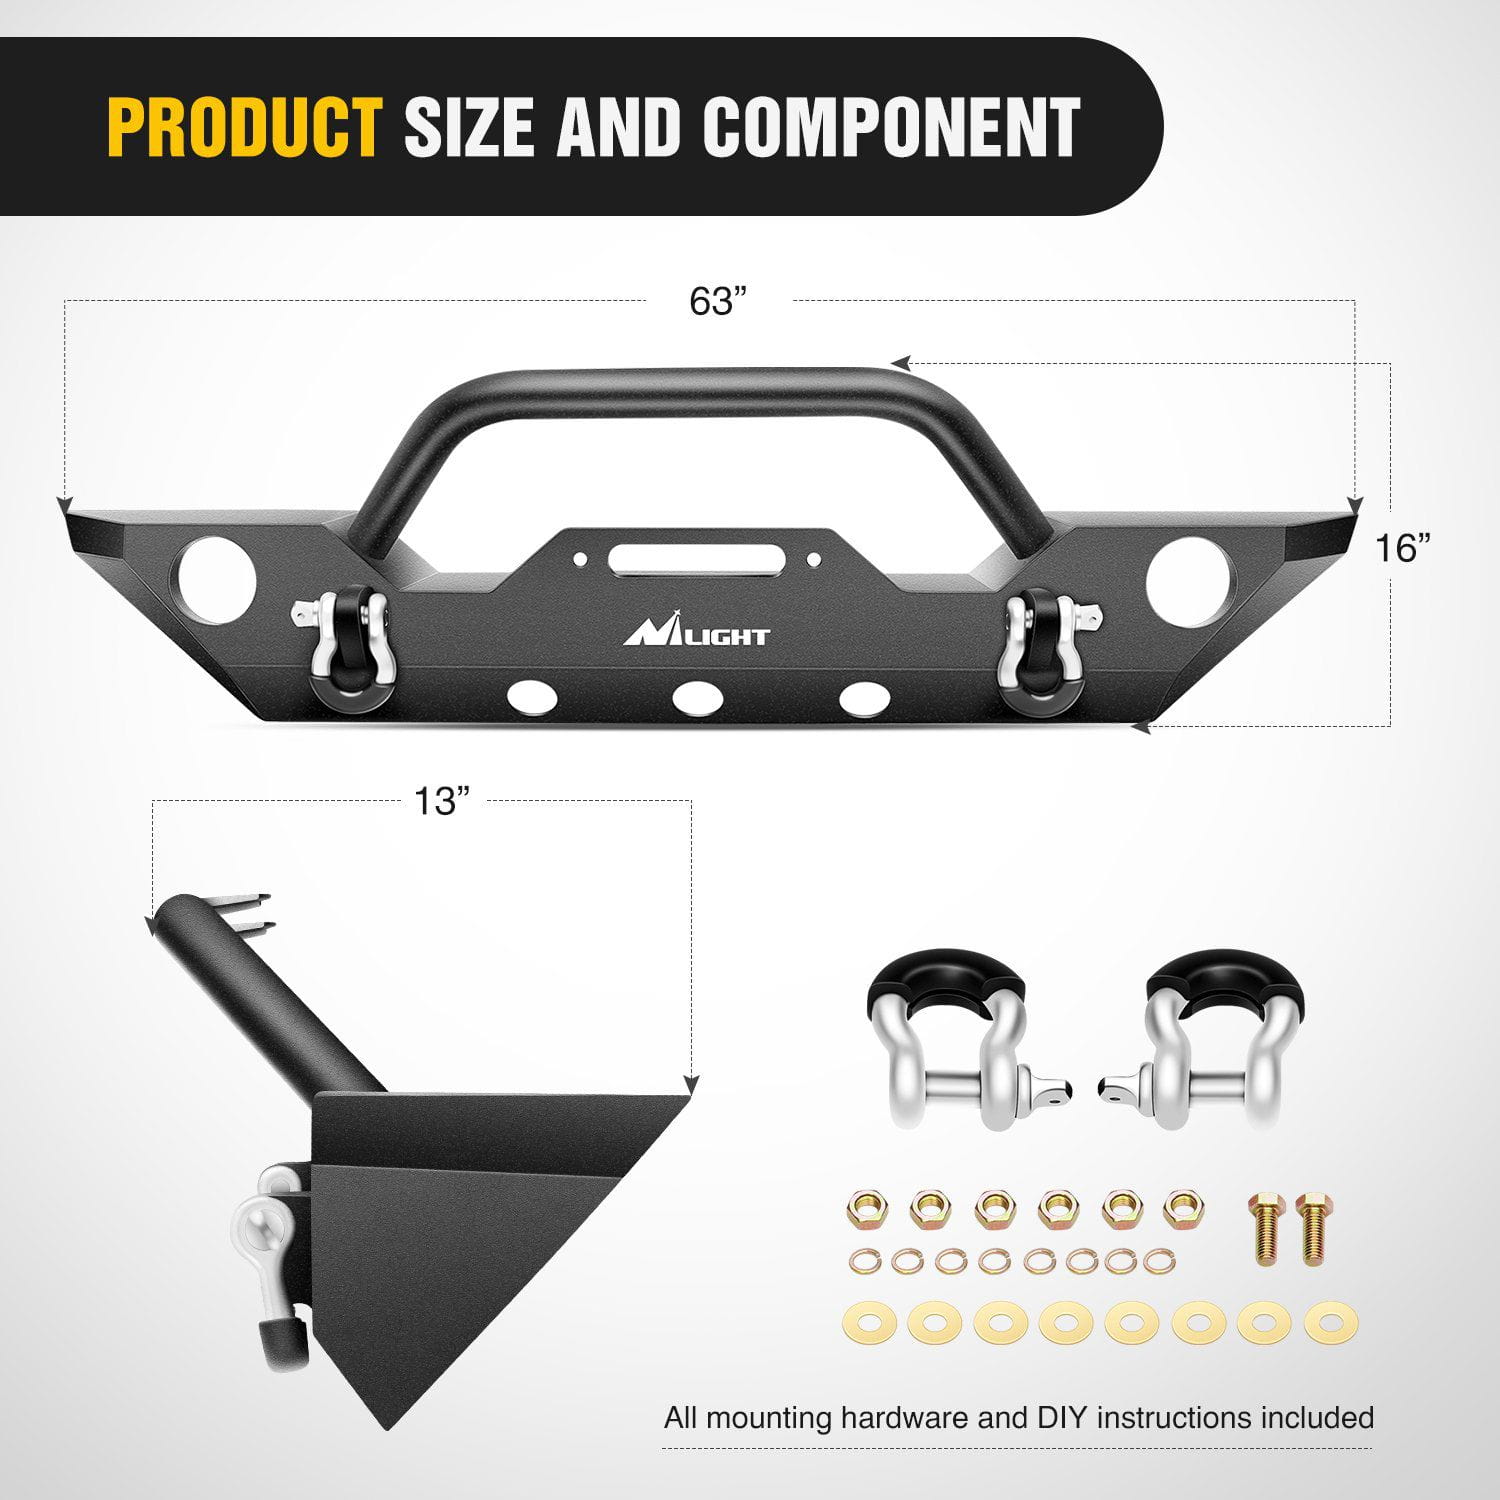 Product Size and Component of Nilight Front Bumper Kit B For 2007-2018 Jeep Wrangler JK